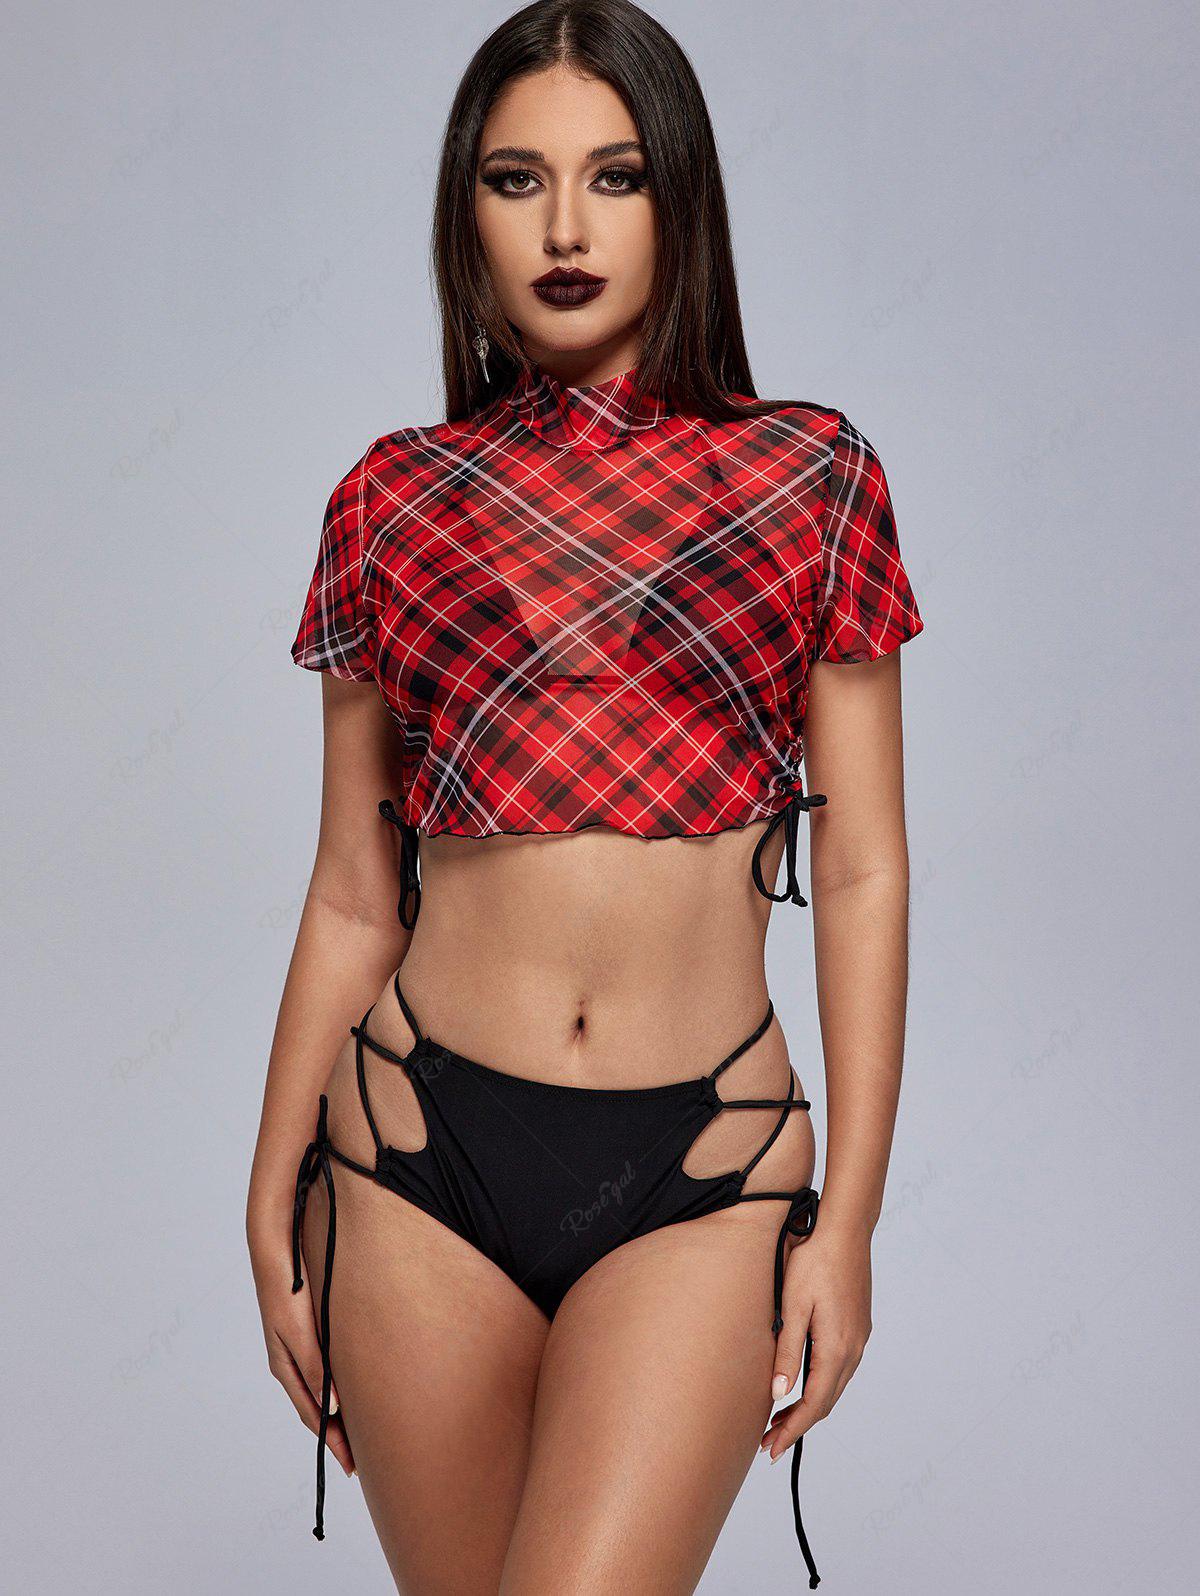 Gothic Halter Lace-up Bikini Swimwear with Plaid Mesh Cinched Cover Up Top